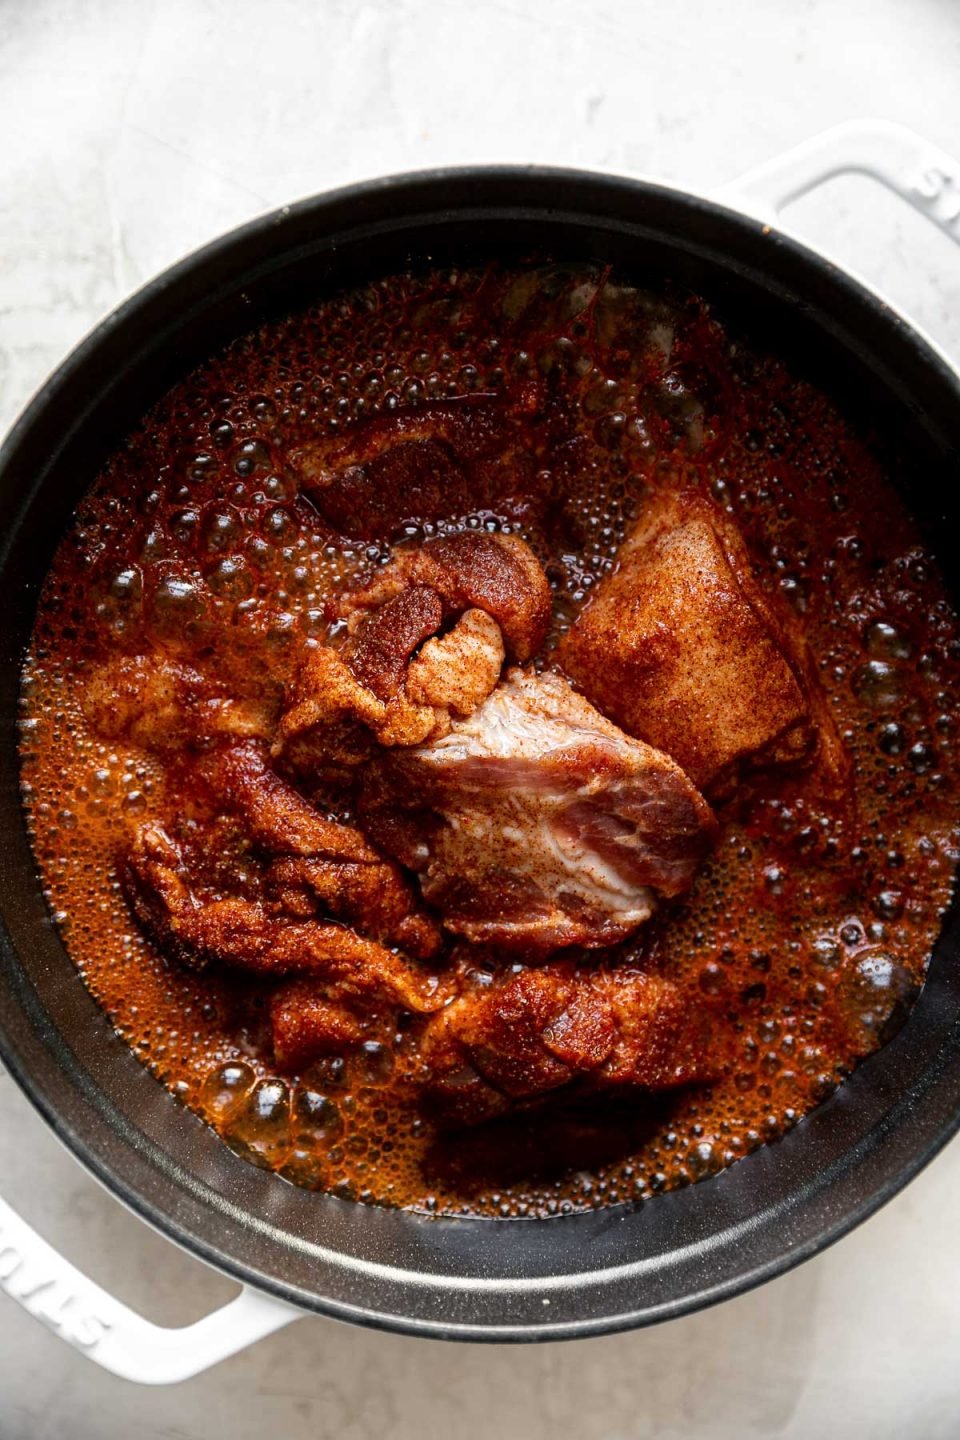 Seasoned pork shown in large white dutch oven atop a creamy cement surface.